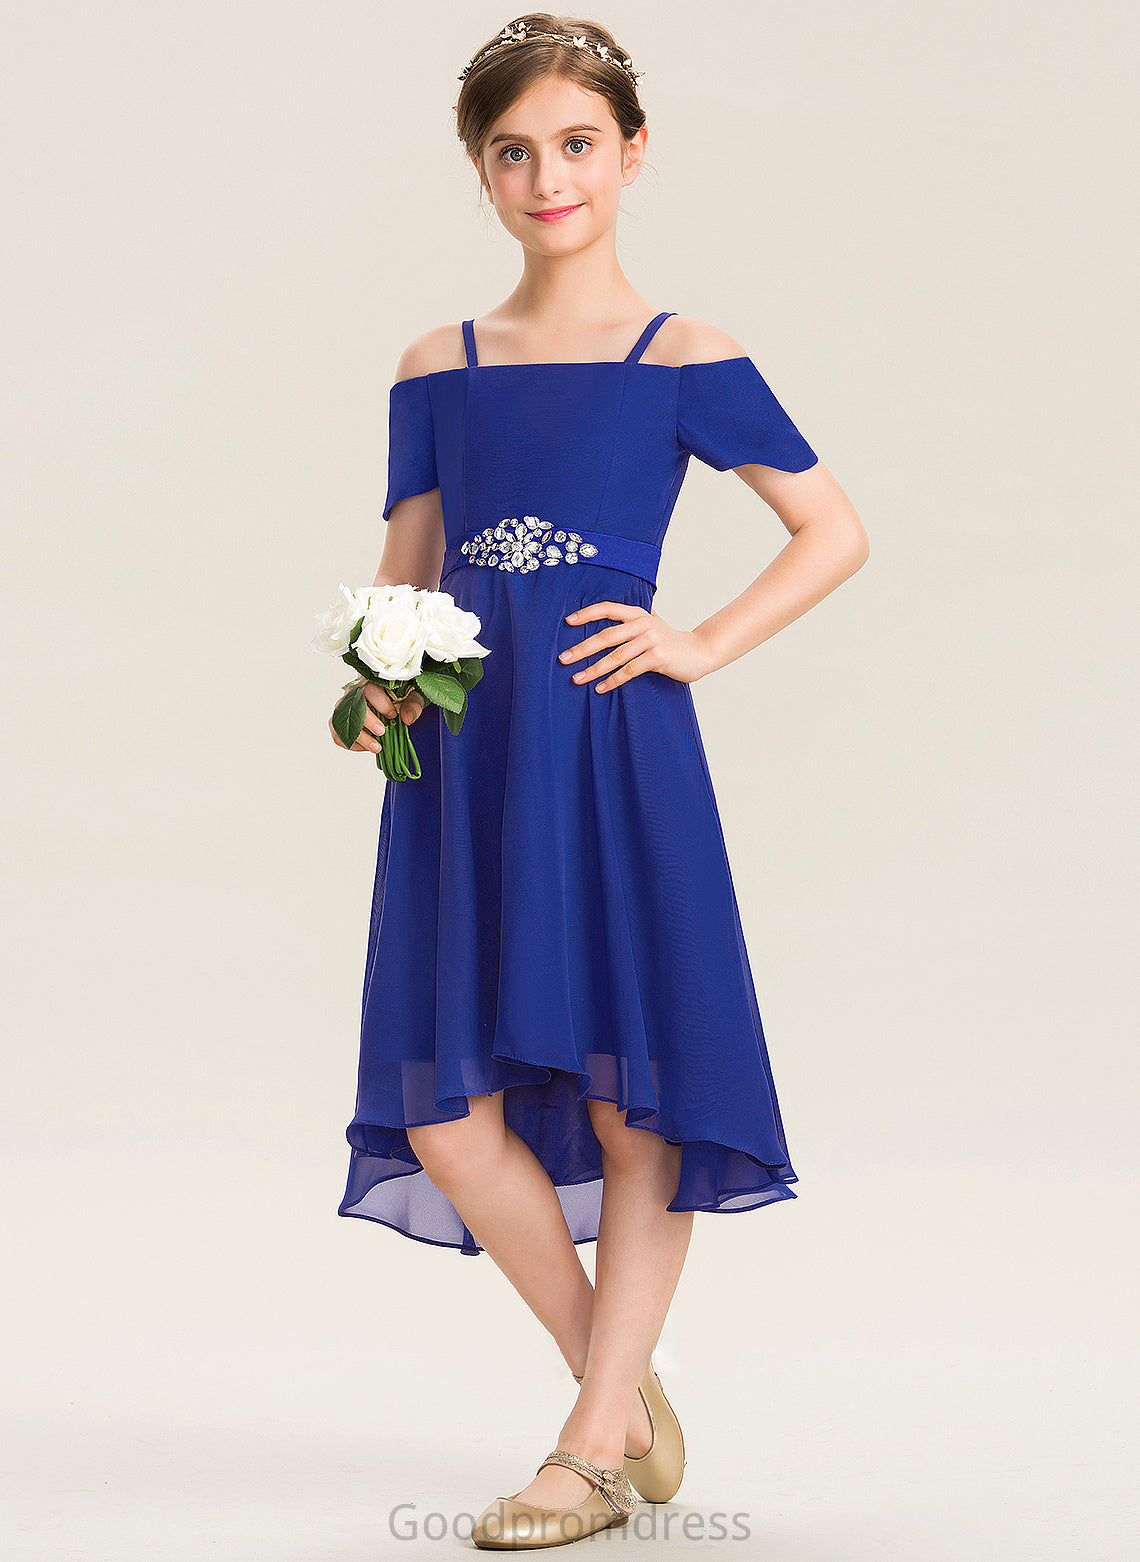 Bow(s) Asymmetrical Junior Bridesmaid Dresses A-Line Off-the-Shoulder Chiffon With Beading Madeline